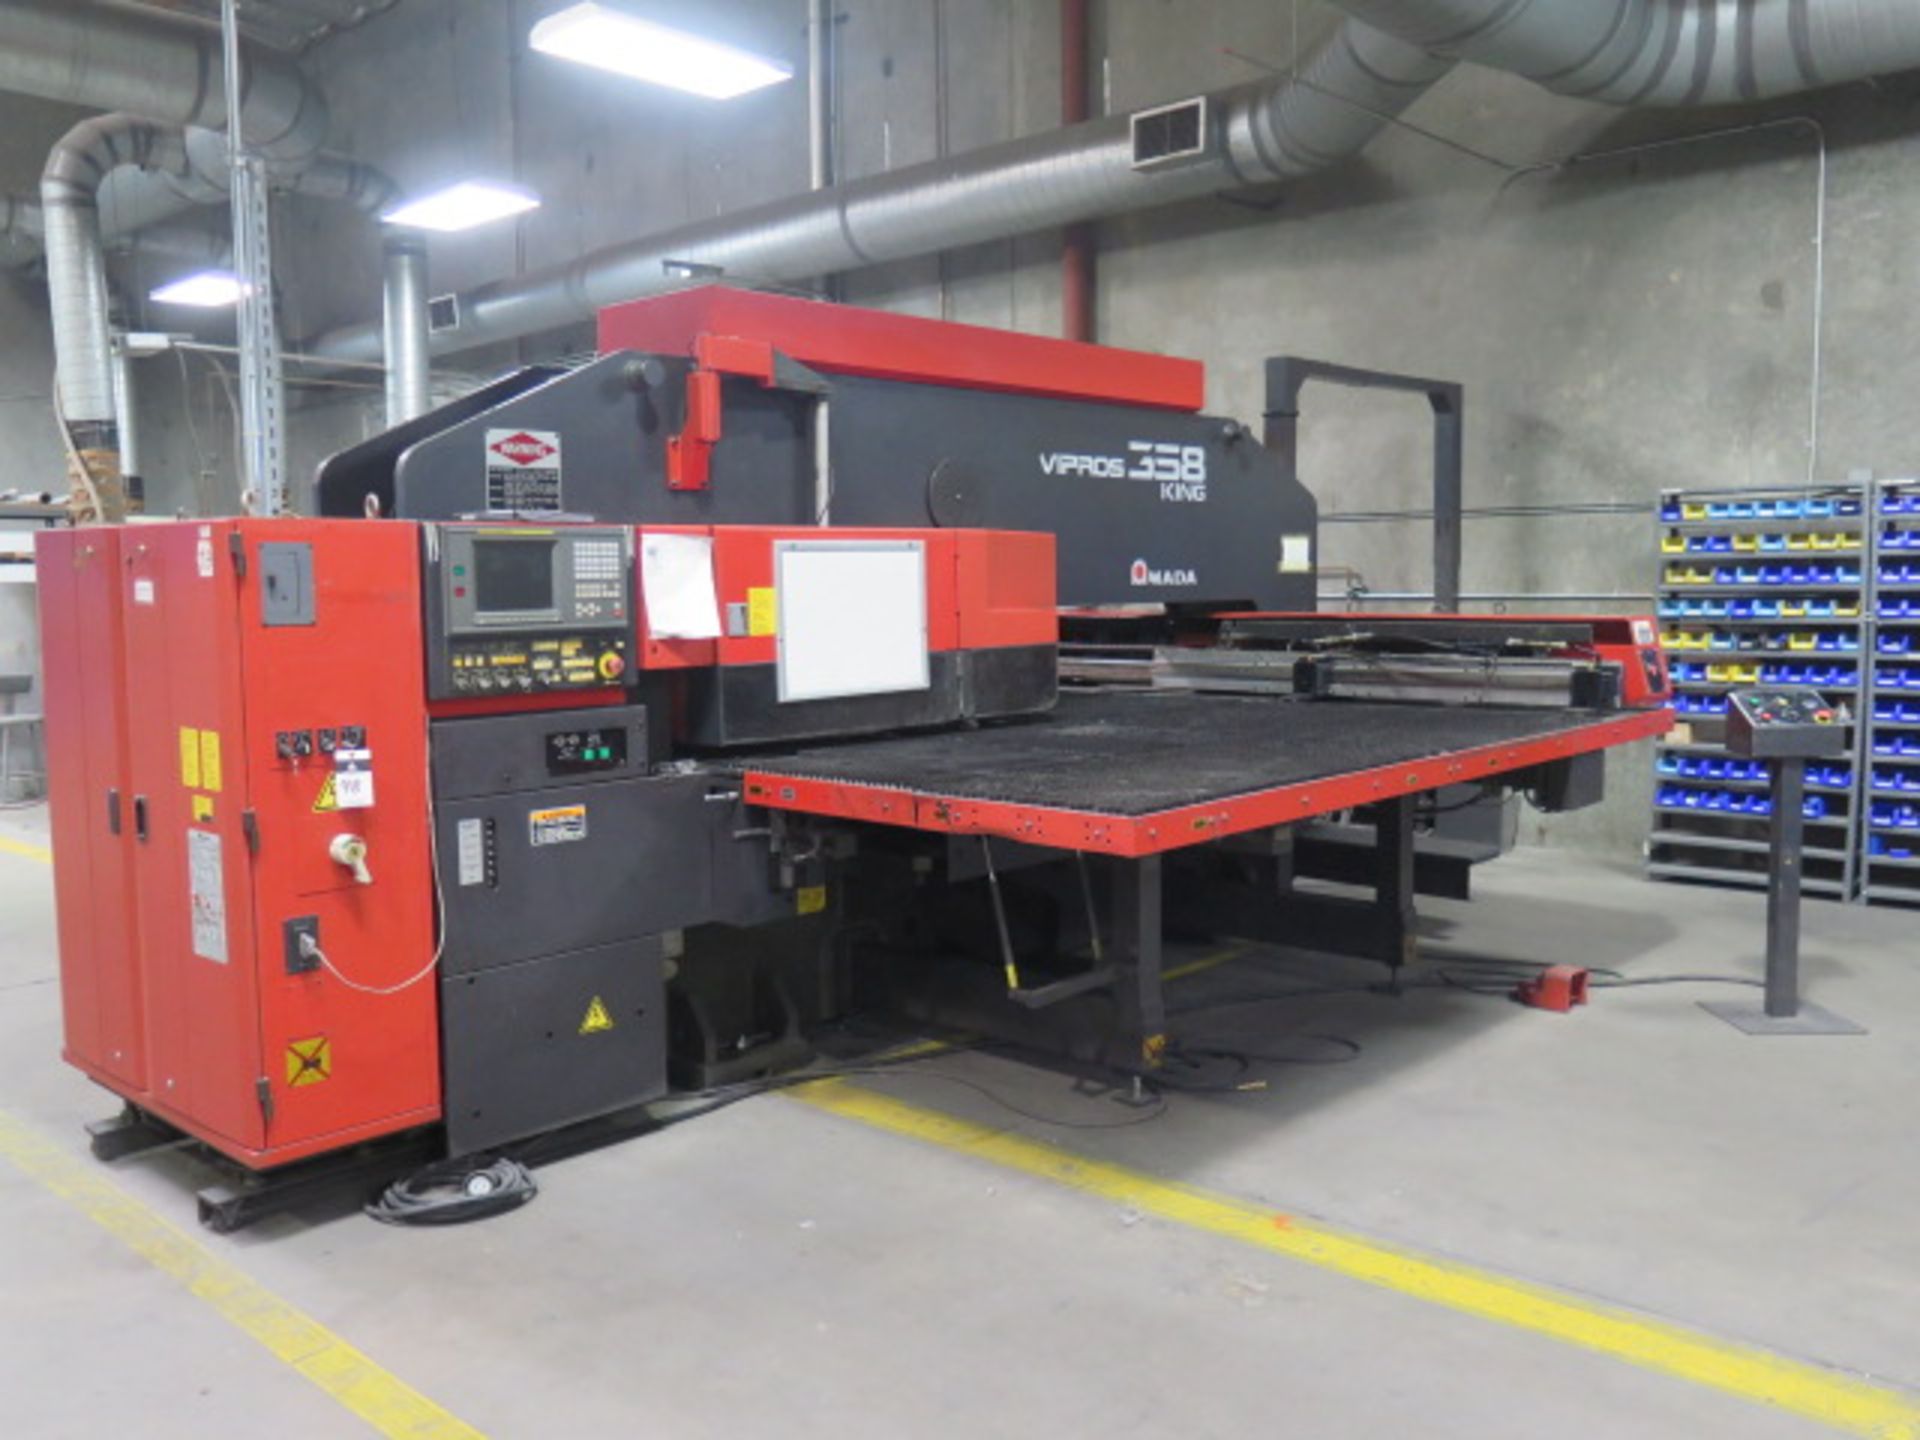 1998 Amada VIPROS 358 King 30 Ton 58-Station CNC Turret Punch Press s/n 35840011 (Recently Factory